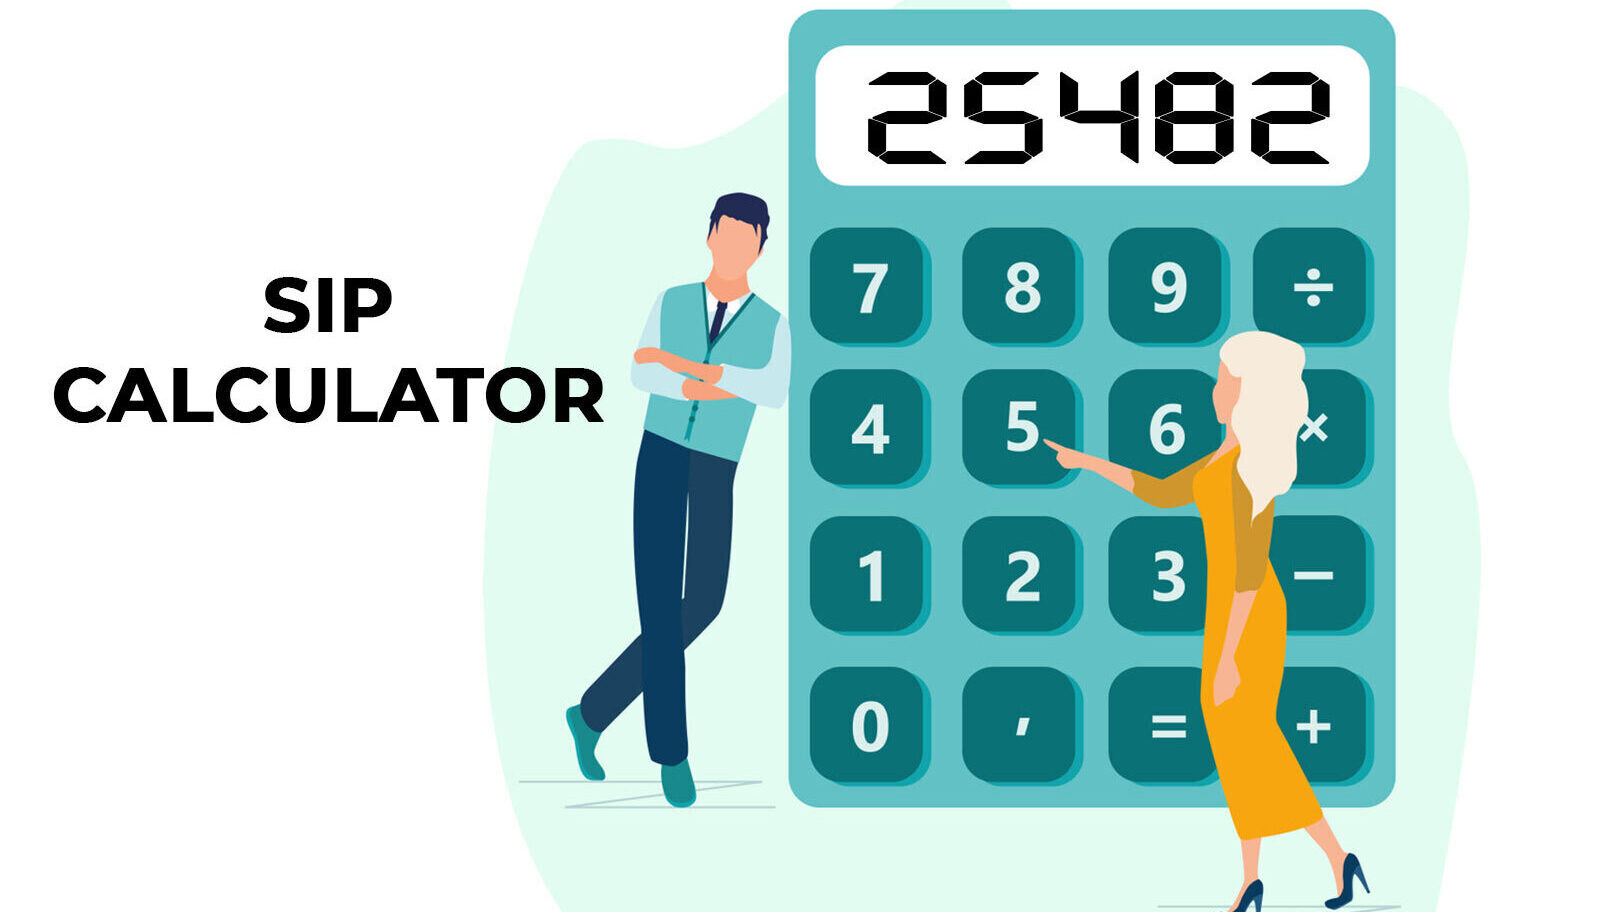 Easy Planning Through a Step up SIP Calculator